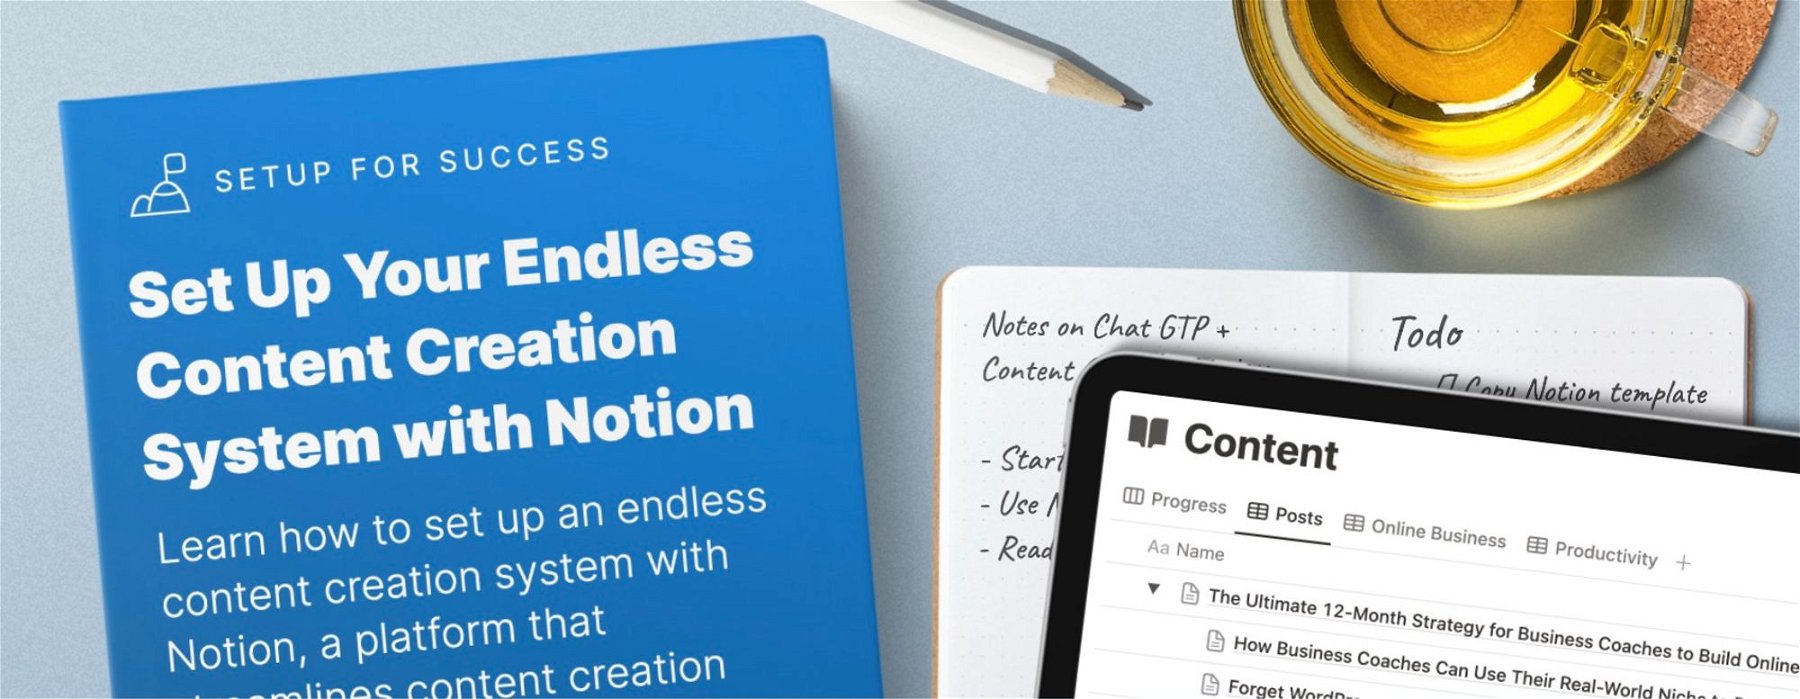 Forget WordPress, Set Up Your Endless Content Creation System with Notion